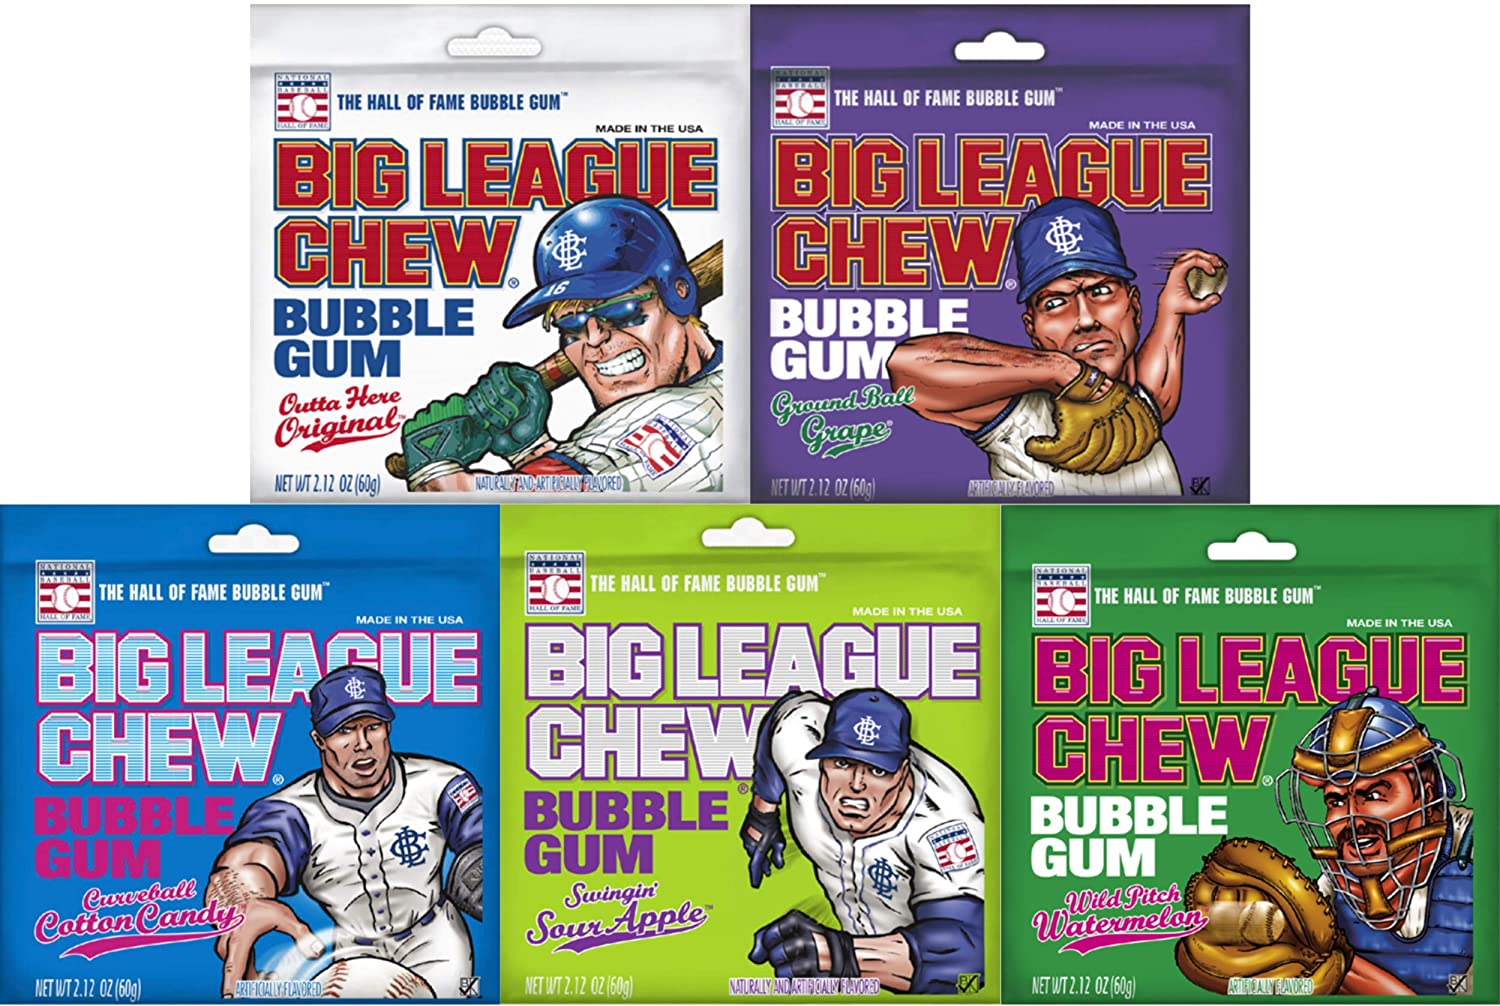 Big League Chew - Big League Chew updated their cover photo.